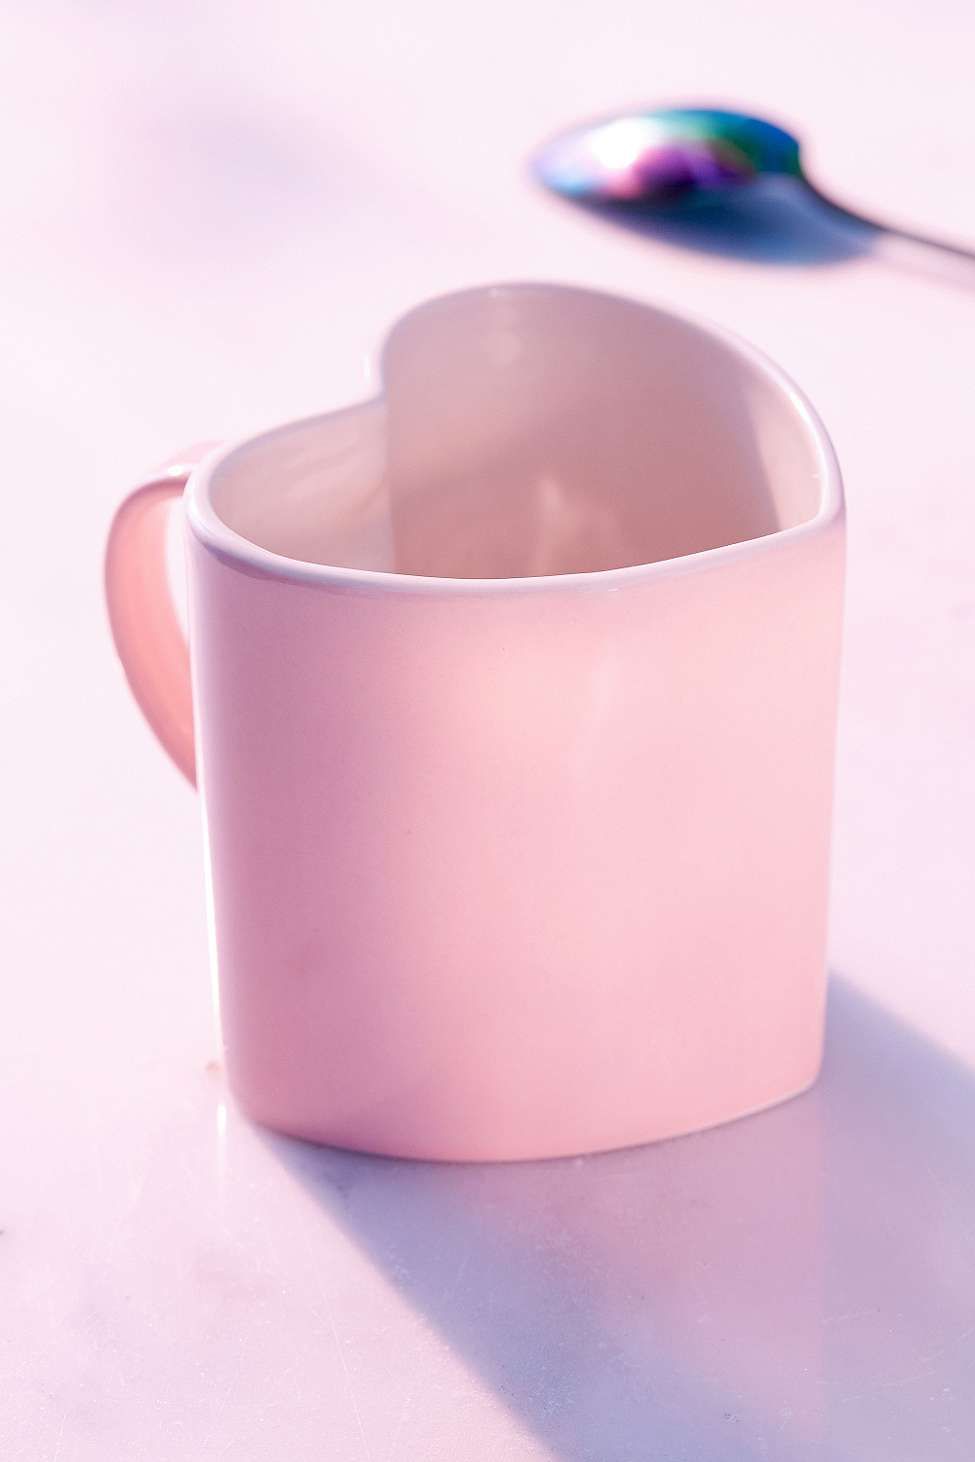 Pink, Serveware, Drinkware, Cup, Peach, Pottery, Natural material, Cup, Still life photography, Teacup, 